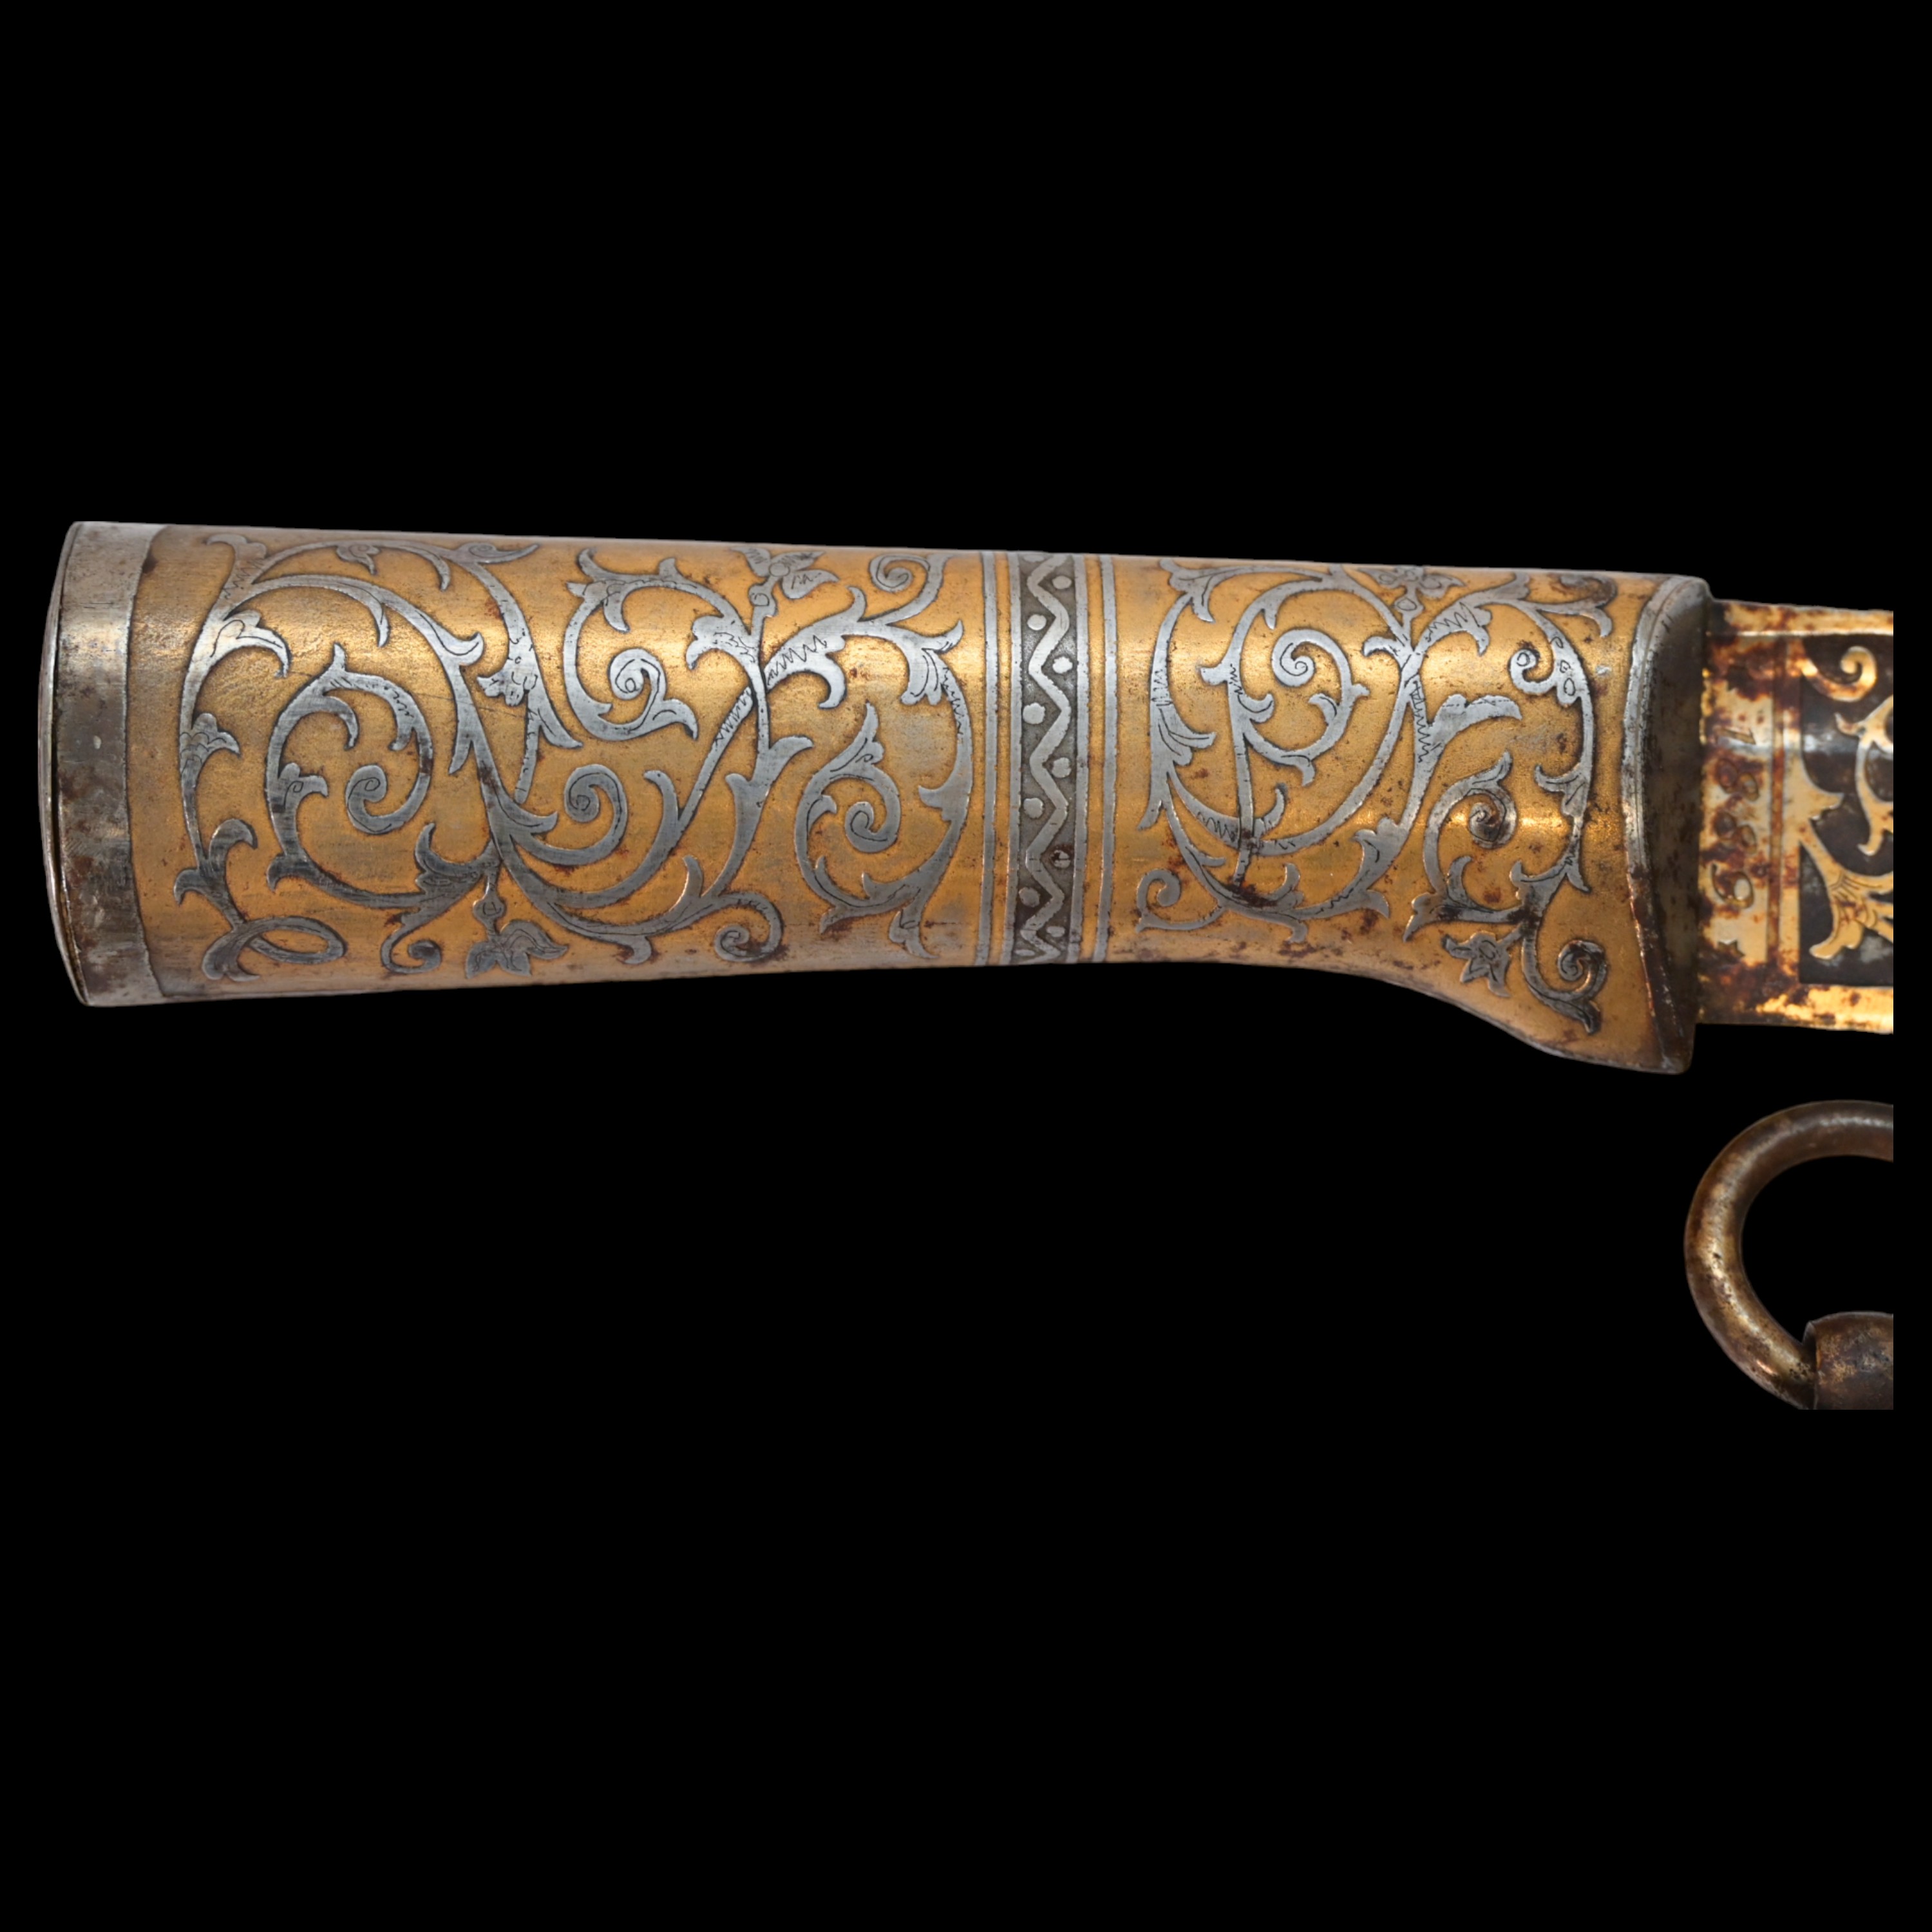 RARE HUNTING KNIFE, DECORATED WITH GOLD AND BLUE, RUSSIAN EMPIRE, ZLATOUST, 1889. - Image 4 of 26